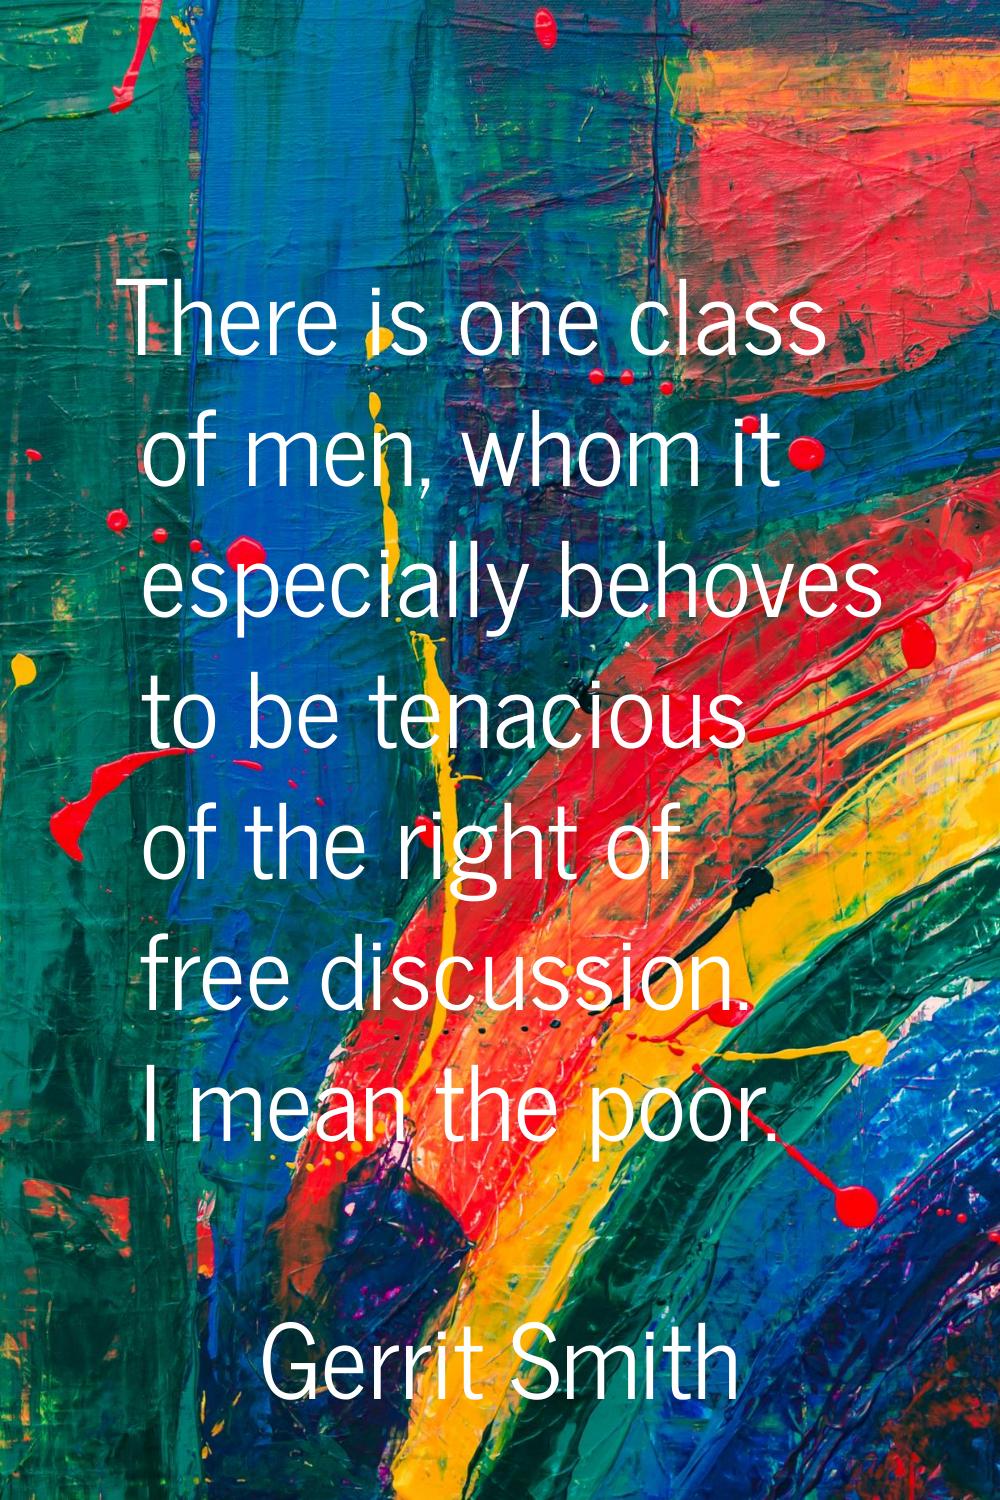 There is one class of men, whom it especially behoves to be tenacious of the right of free discussi